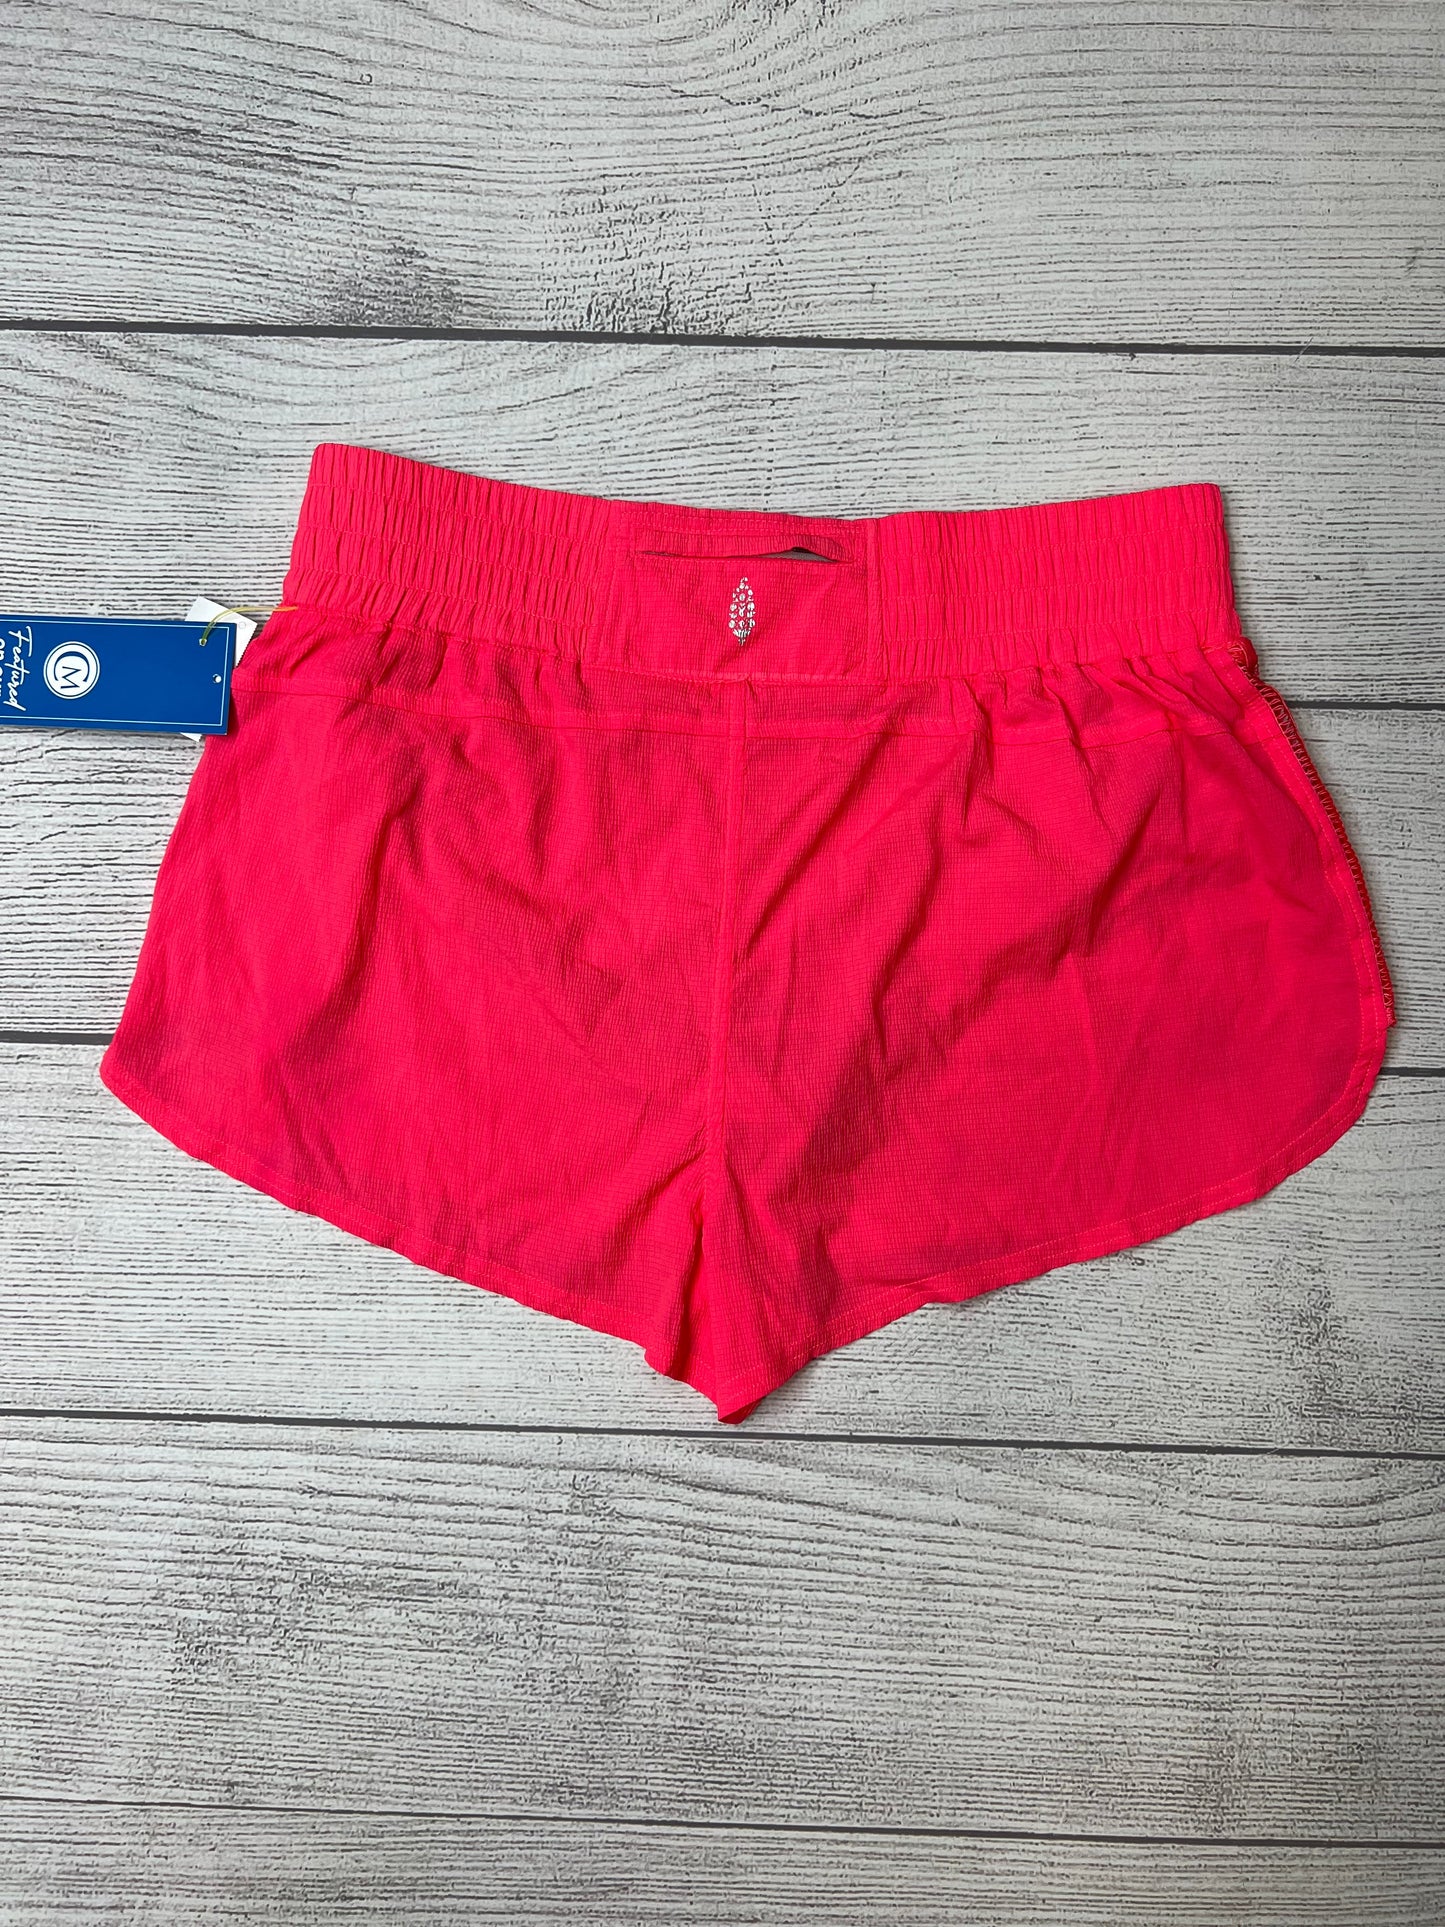 Pink Athletic Shorts Free People, Size L